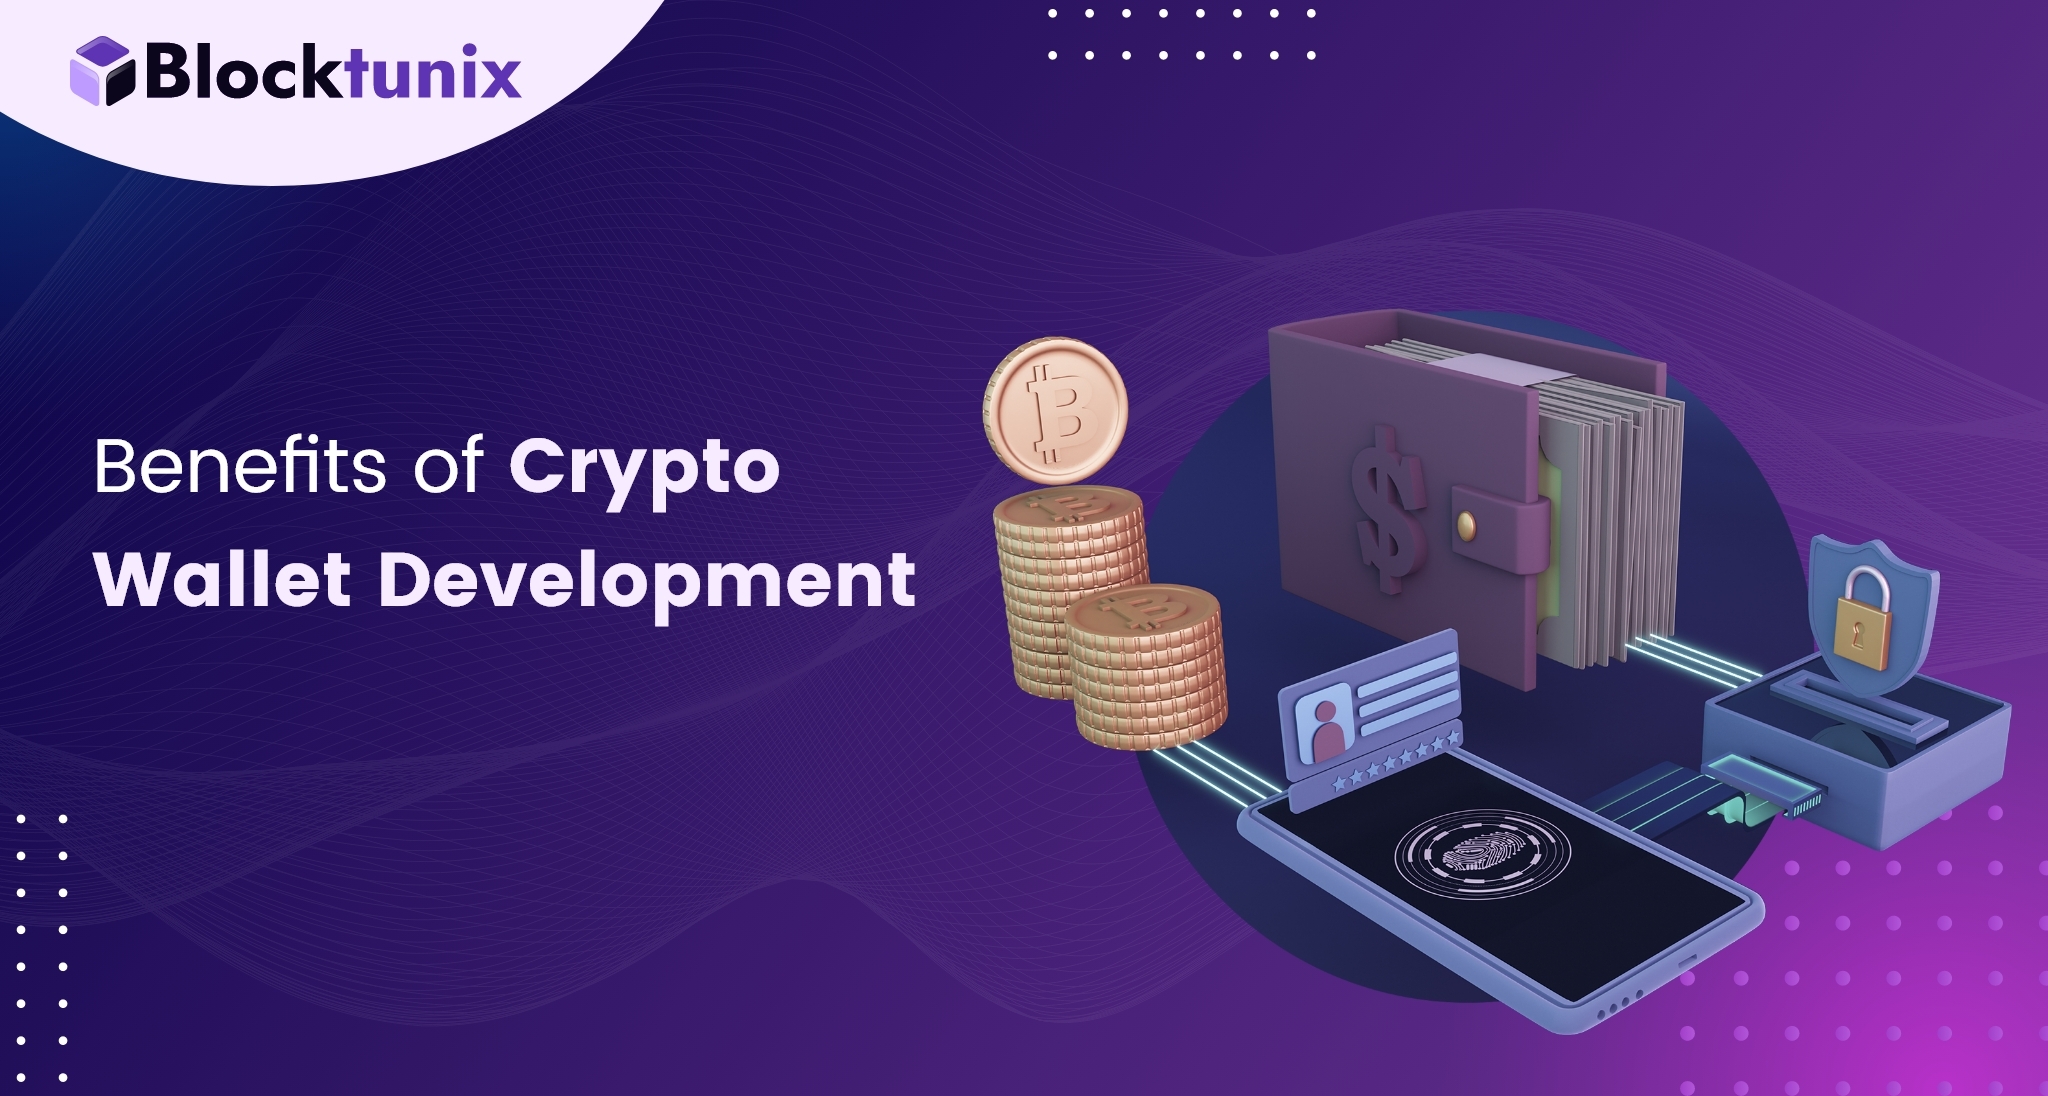 Benefits of Crypto Wallet